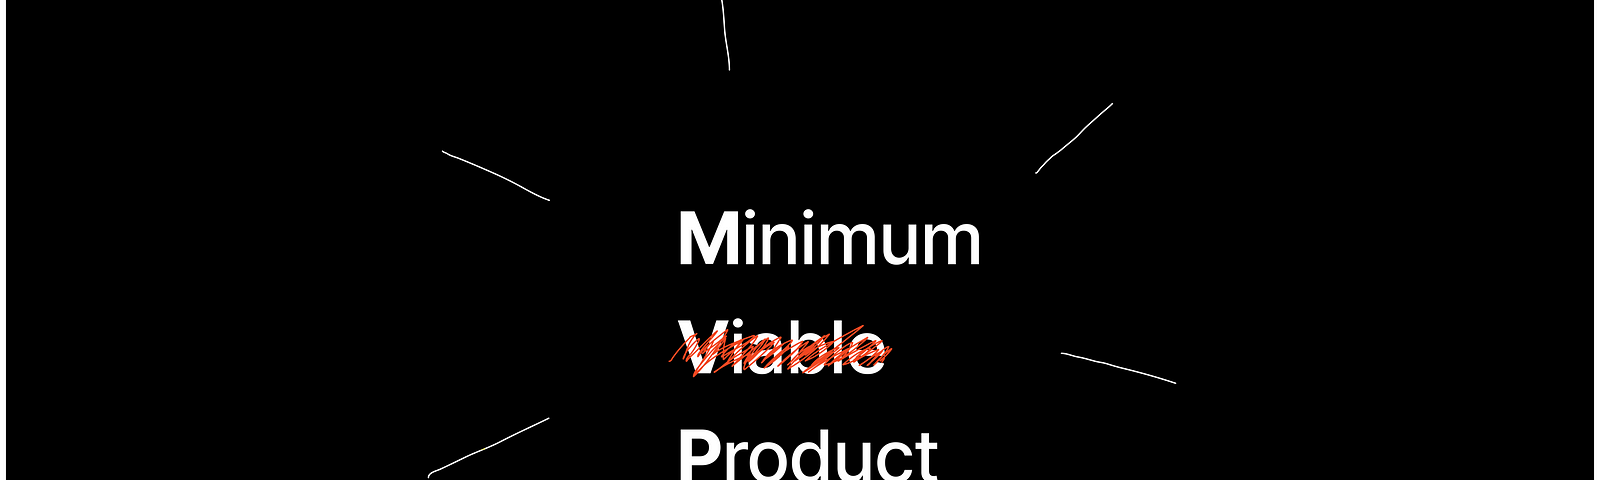 Illustration questionning the concept of Minimum Viable Product, with “Viable” crossed-out